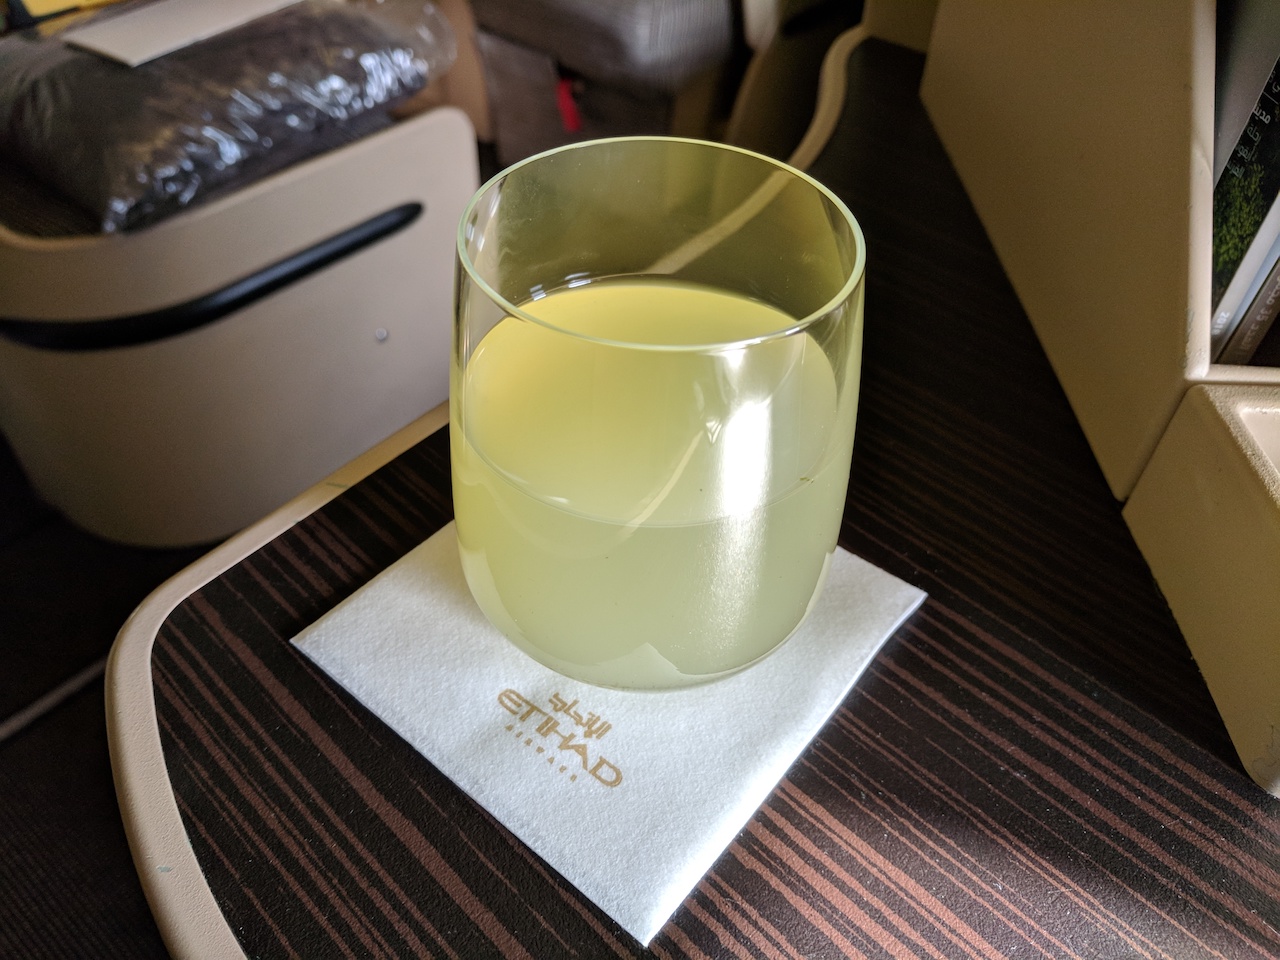 a glass of yellow liquid on a napkin